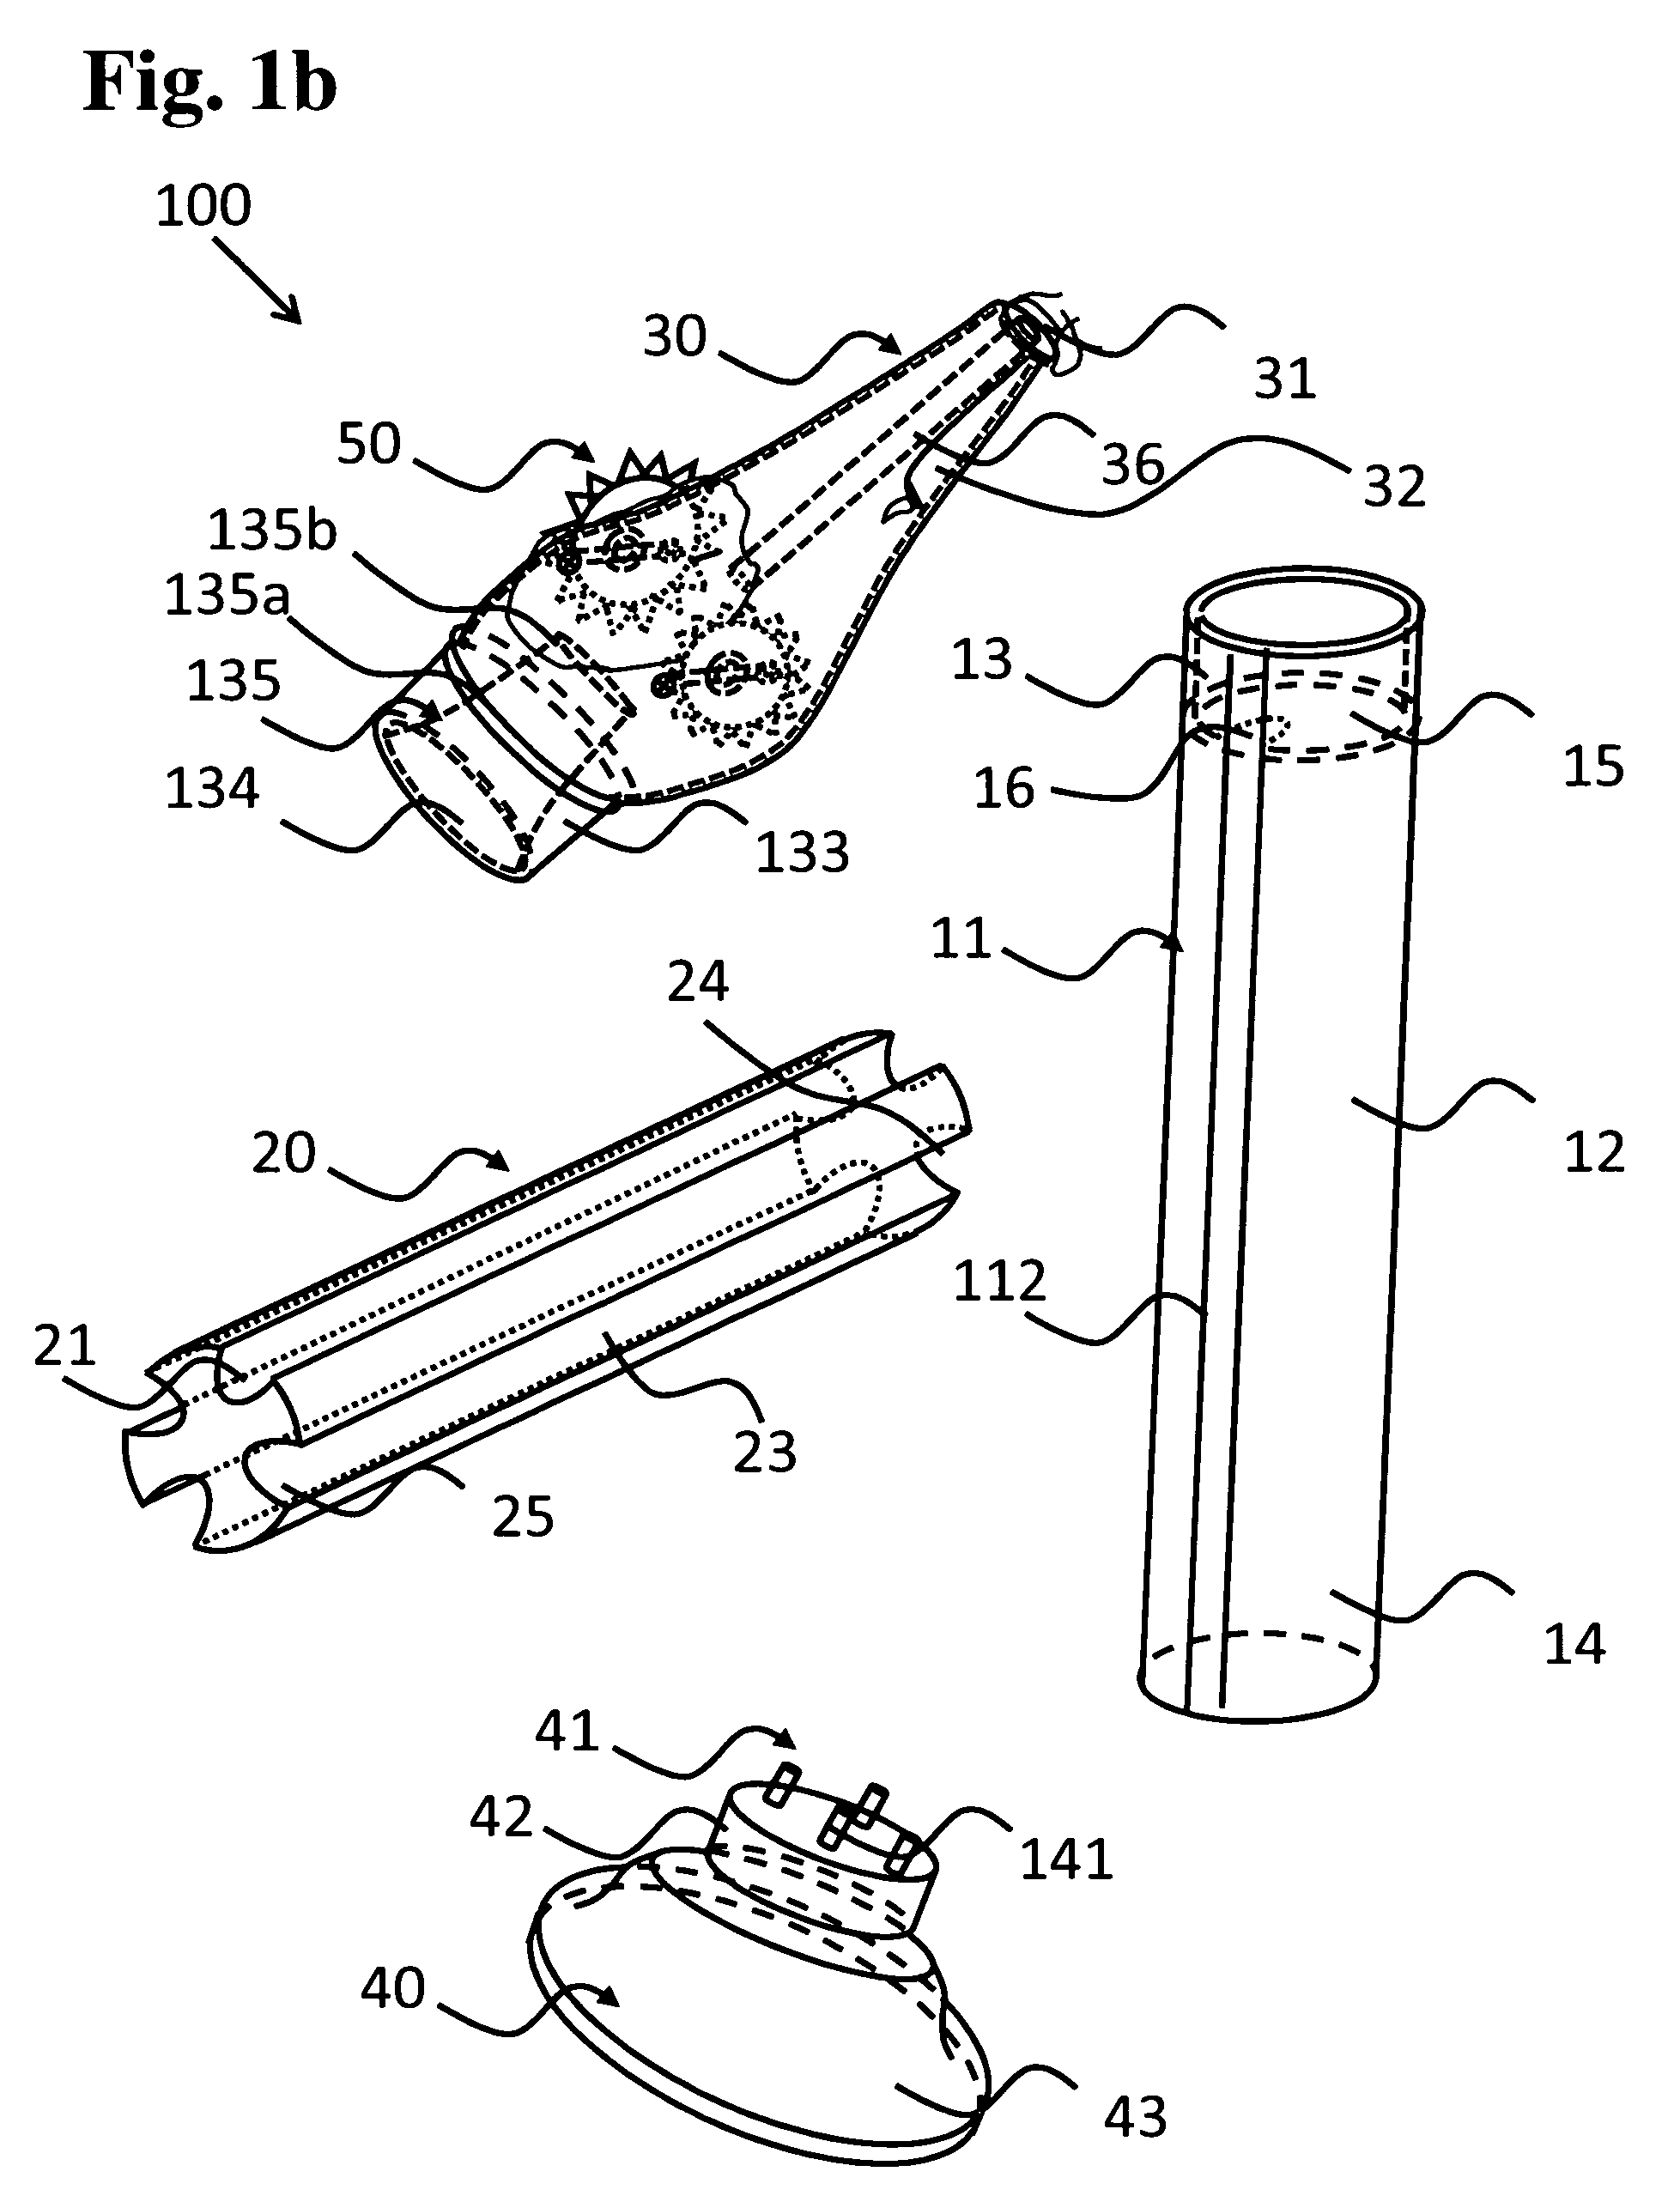 Continuous feed inter-dental brush assembly and device